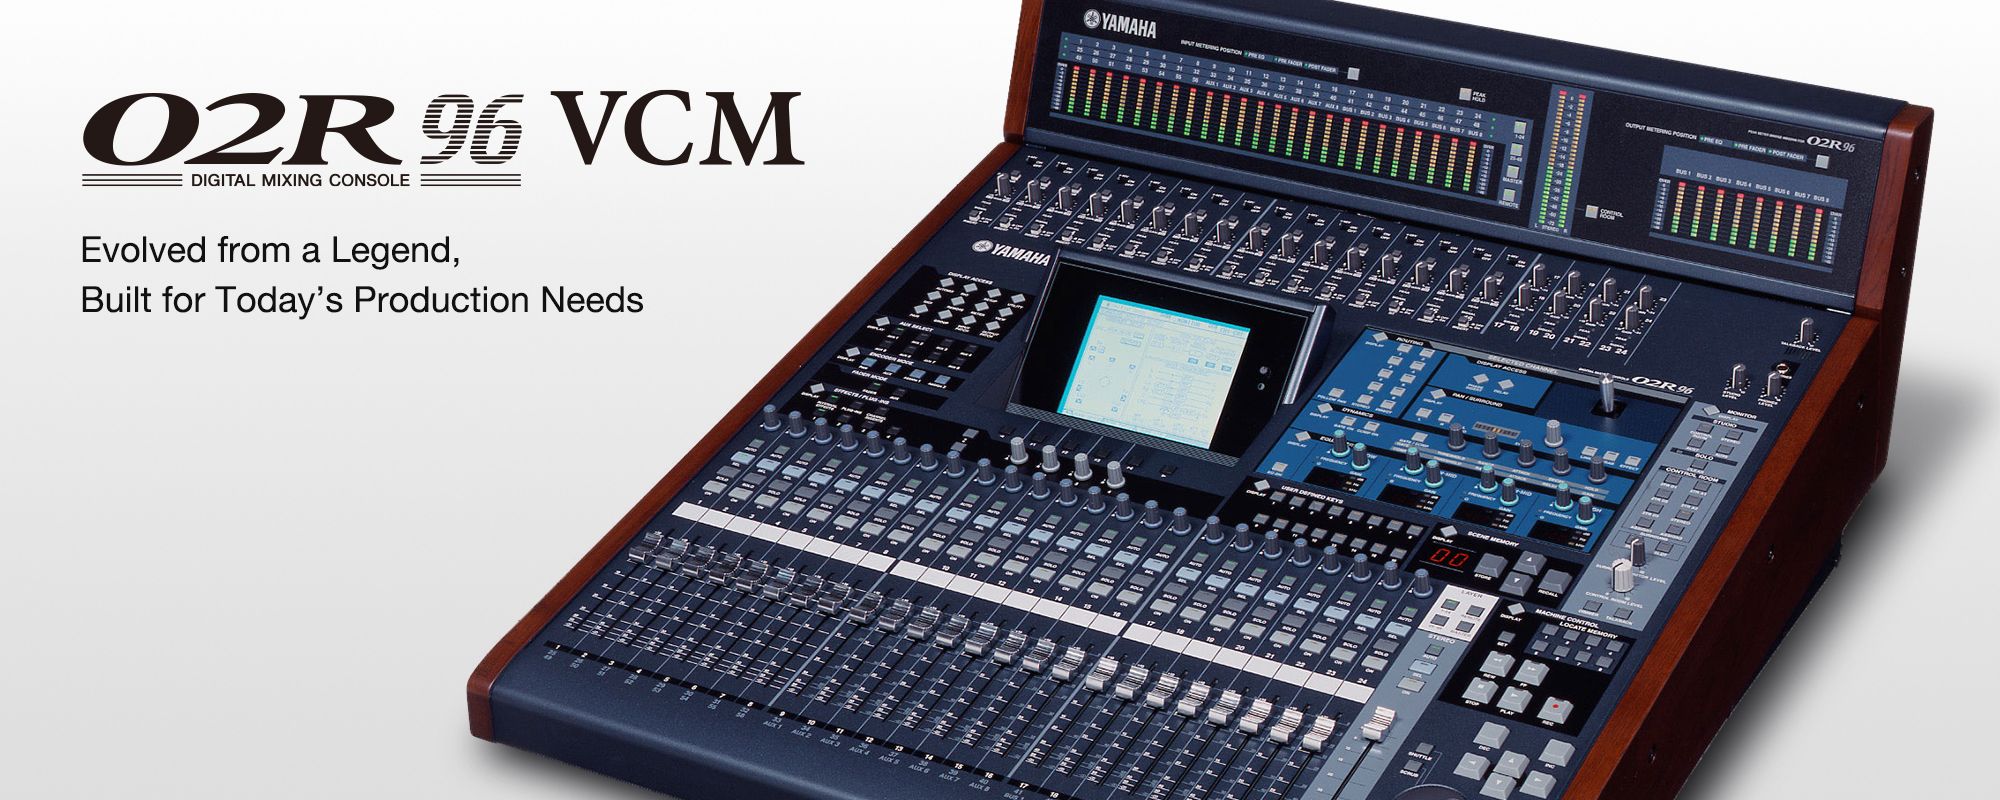 02R96VCM - Overview - Mixers - Professional Audio - Products - Yamaha USA